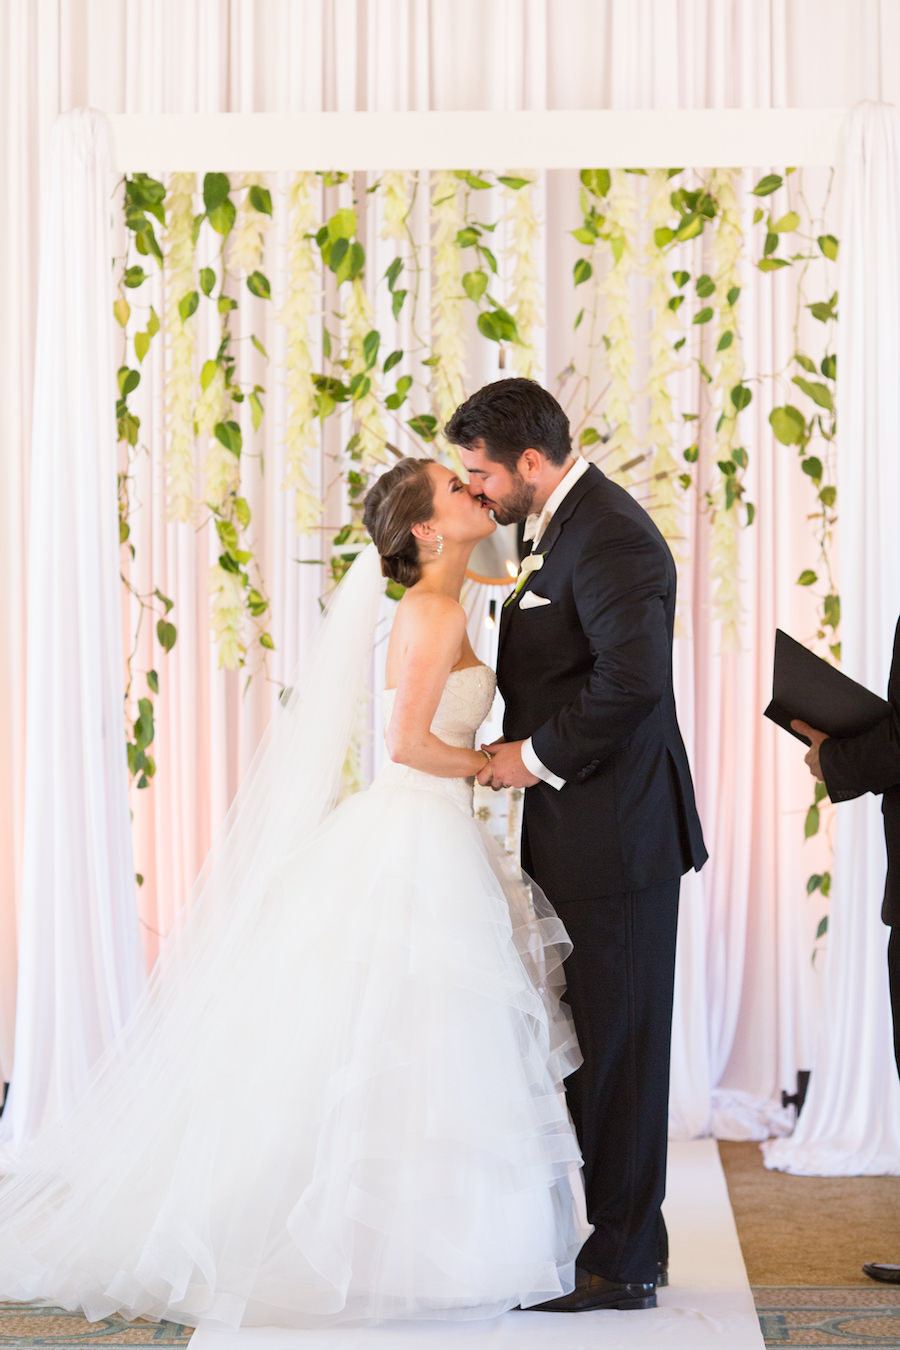 Alessandra Alessi Bridal Wedding Ceremony Portrait Bride and Groom Kiss | Elegant Wedding Ceremony Decor Altar White Draped Backdrop with Hanging Flowers, Greenery and Gold Mirror | Tampa Bay Wedding Photographer Brandi Image Photography | Planner Parties a la Carte